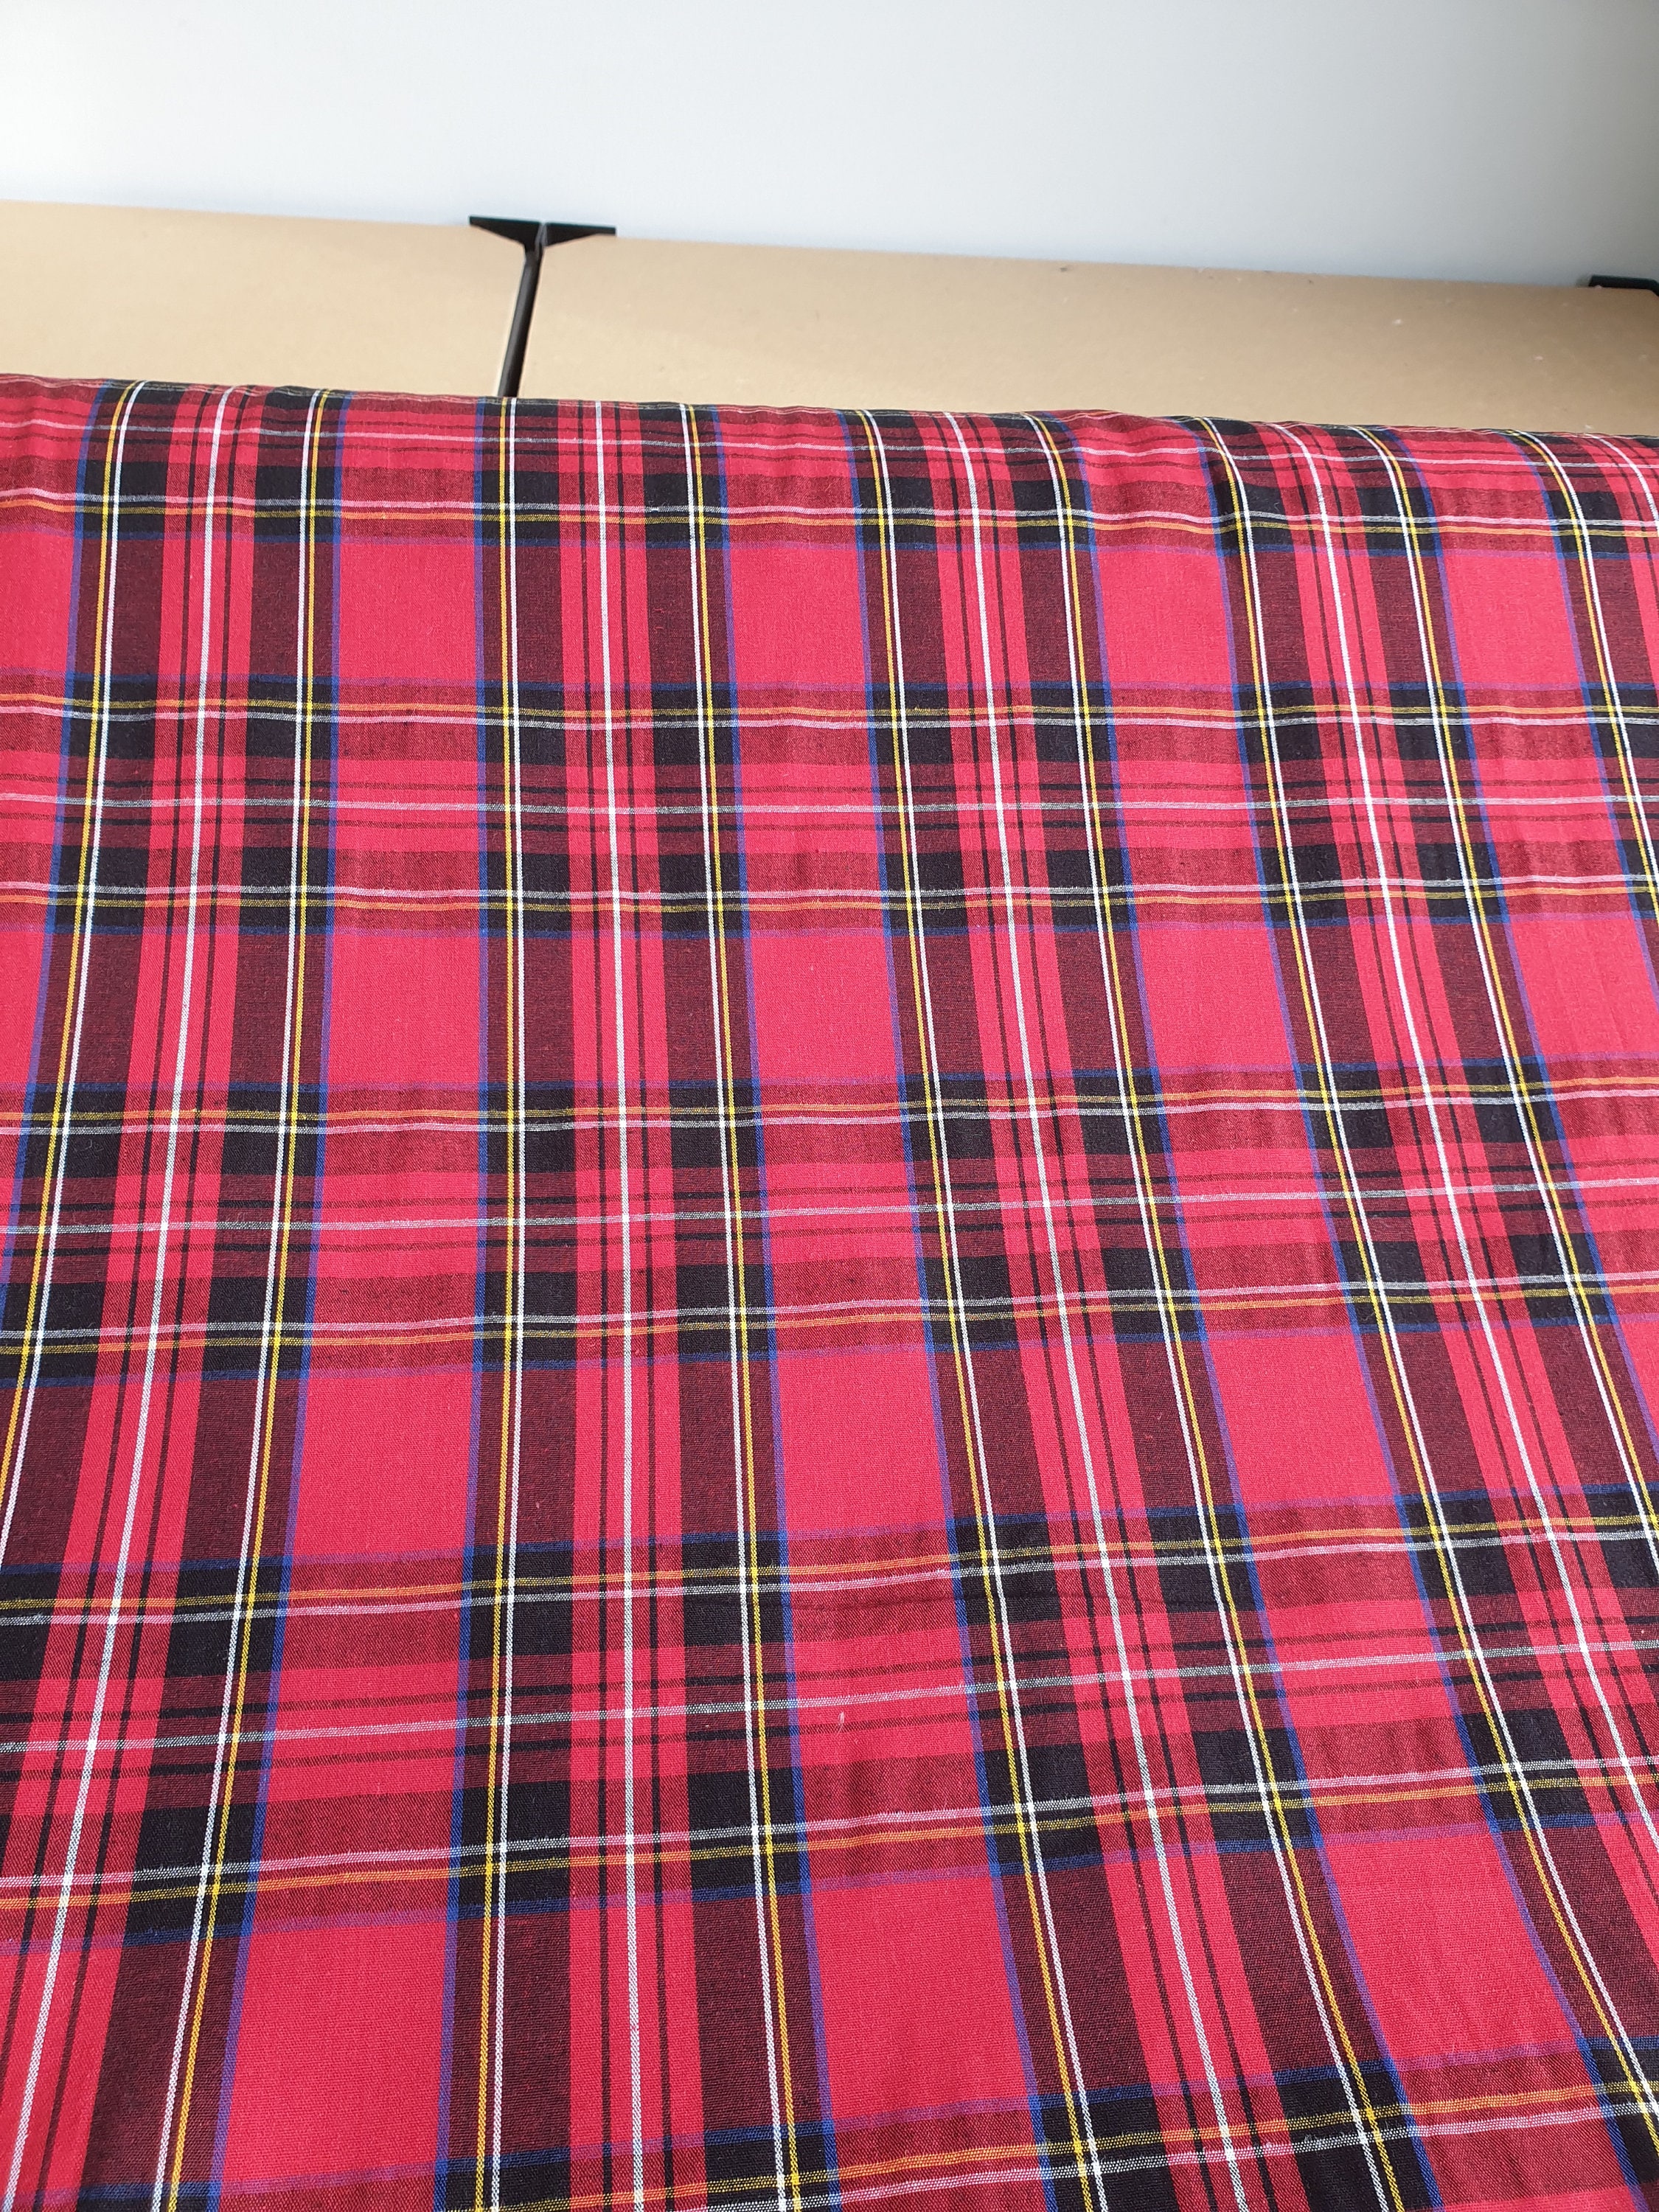 OFFCUT POLYCOTTON FABRIC Red Tartan Plaid Check REMNANTS METRES FAST DESPATCH